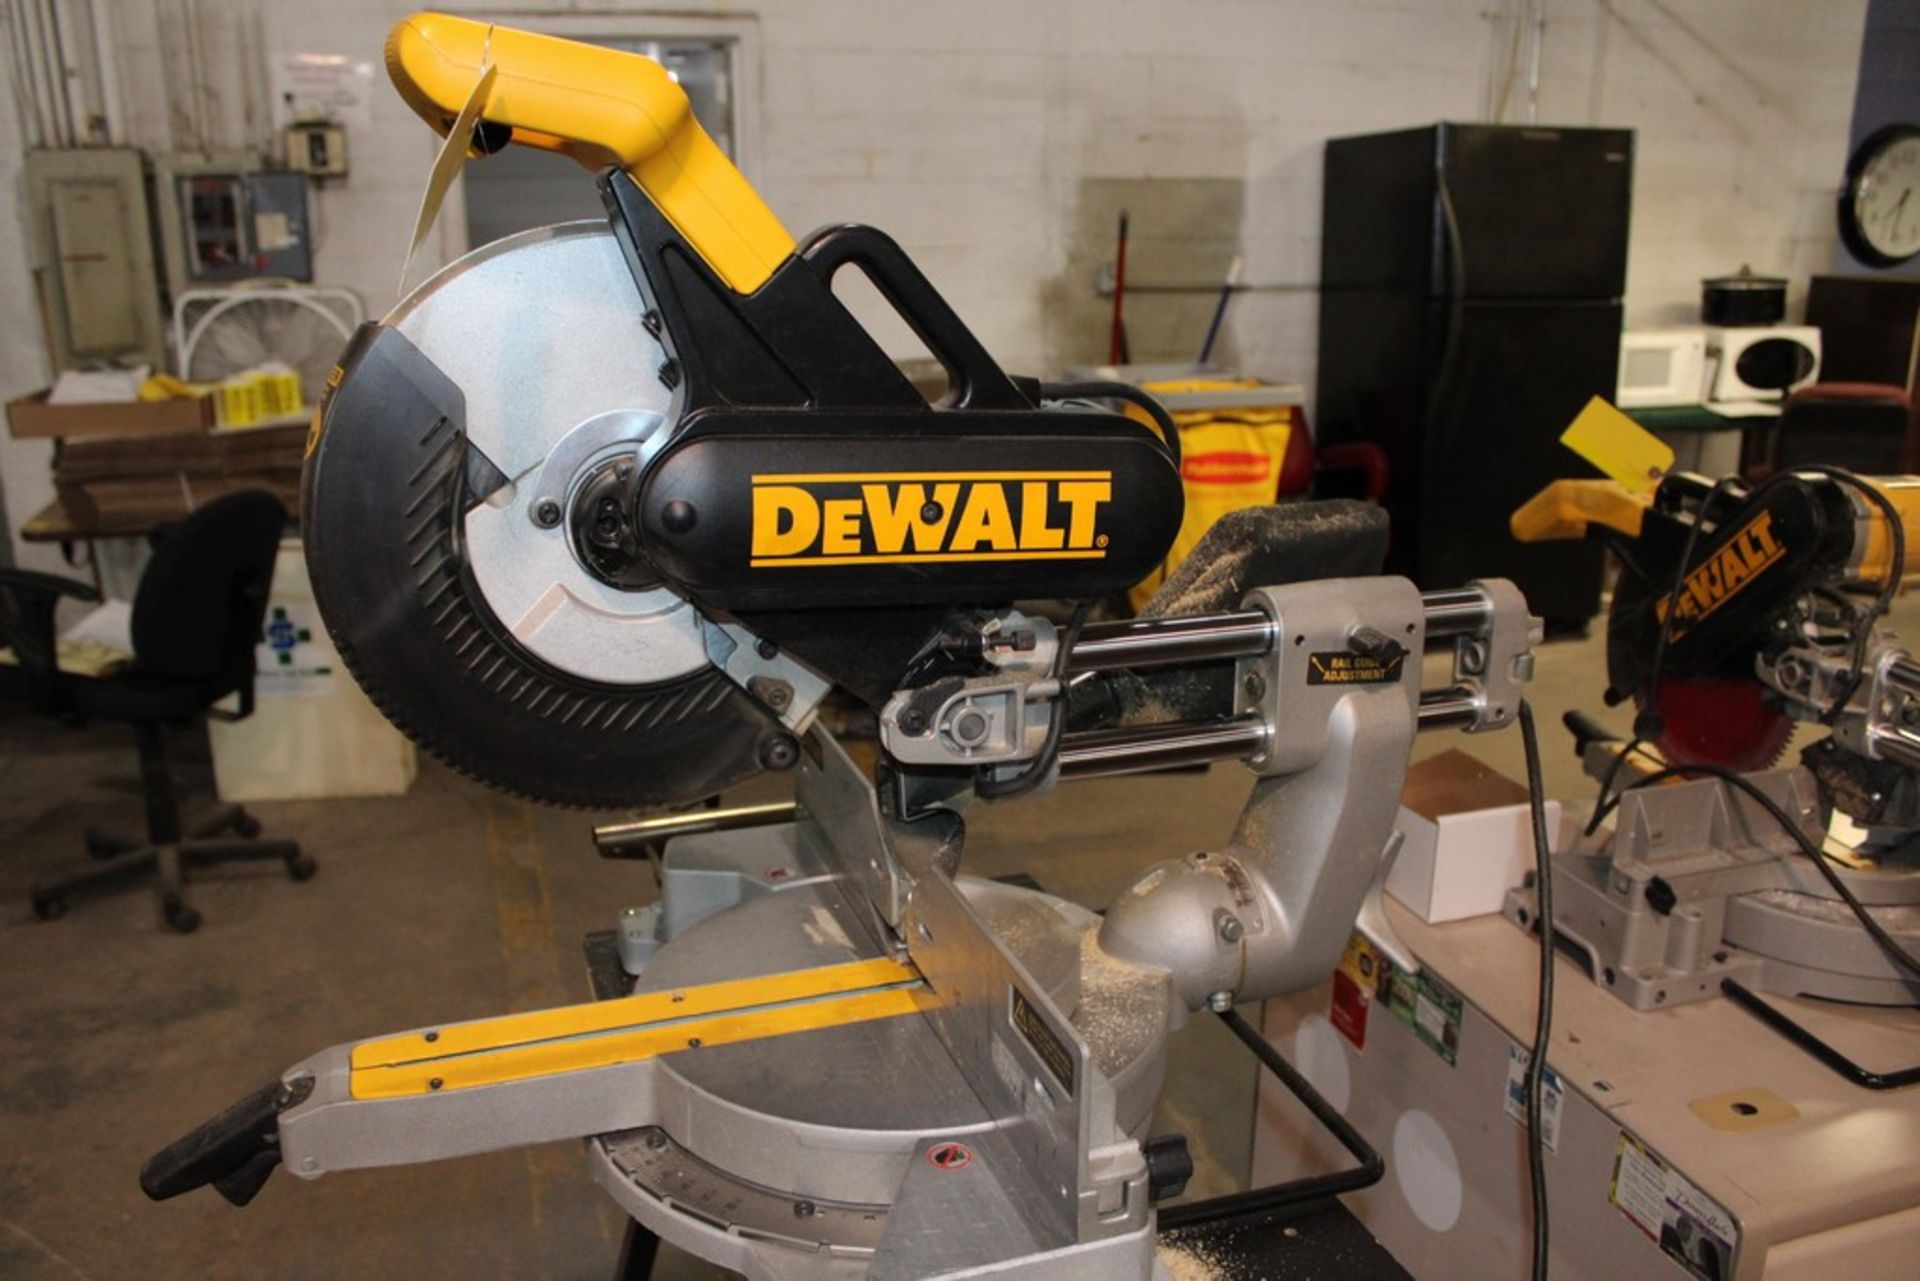 DEWALT MODEL DW708 12" SLIDING COMPOUND MITER SAW WITH PORTABLE SAW STAND - Image 2 of 3